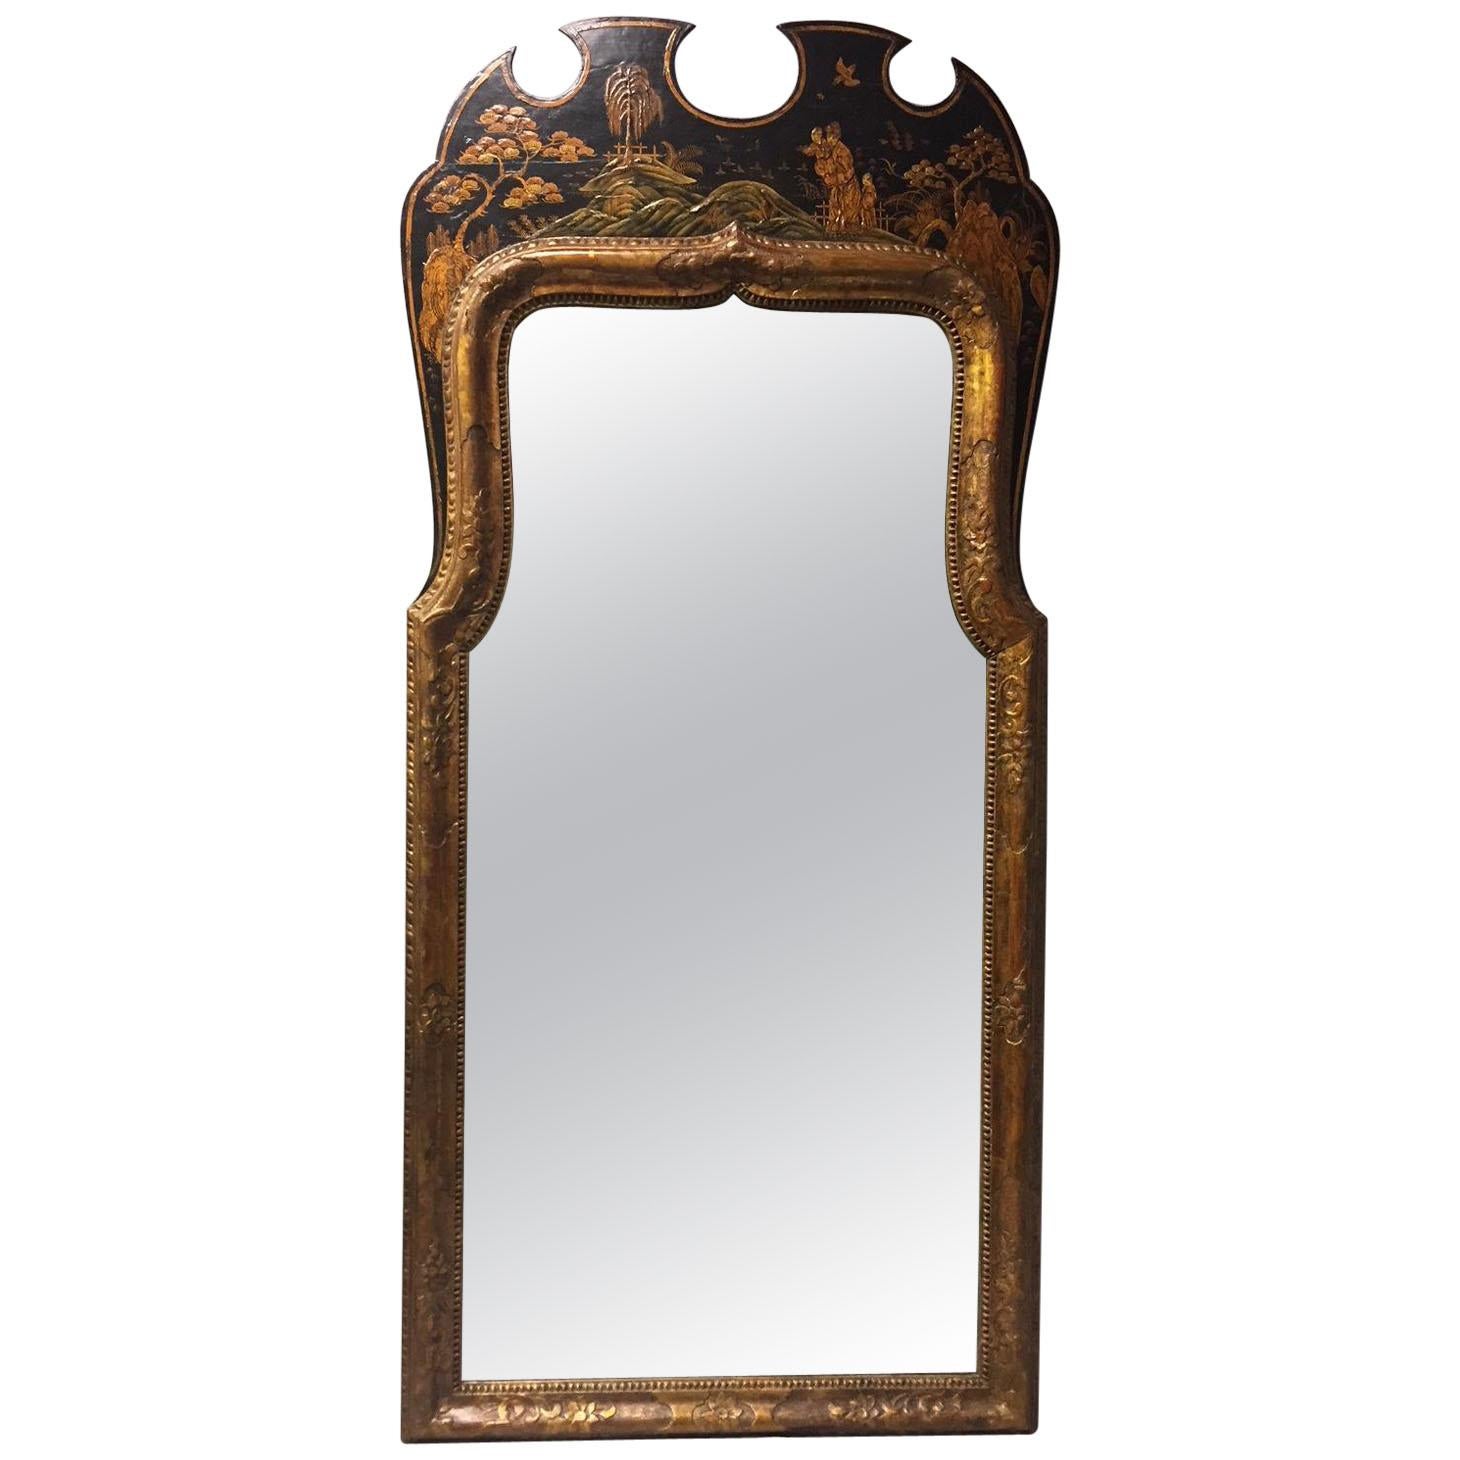 English Queen Anne Style Japanned Mirror, 19th Century